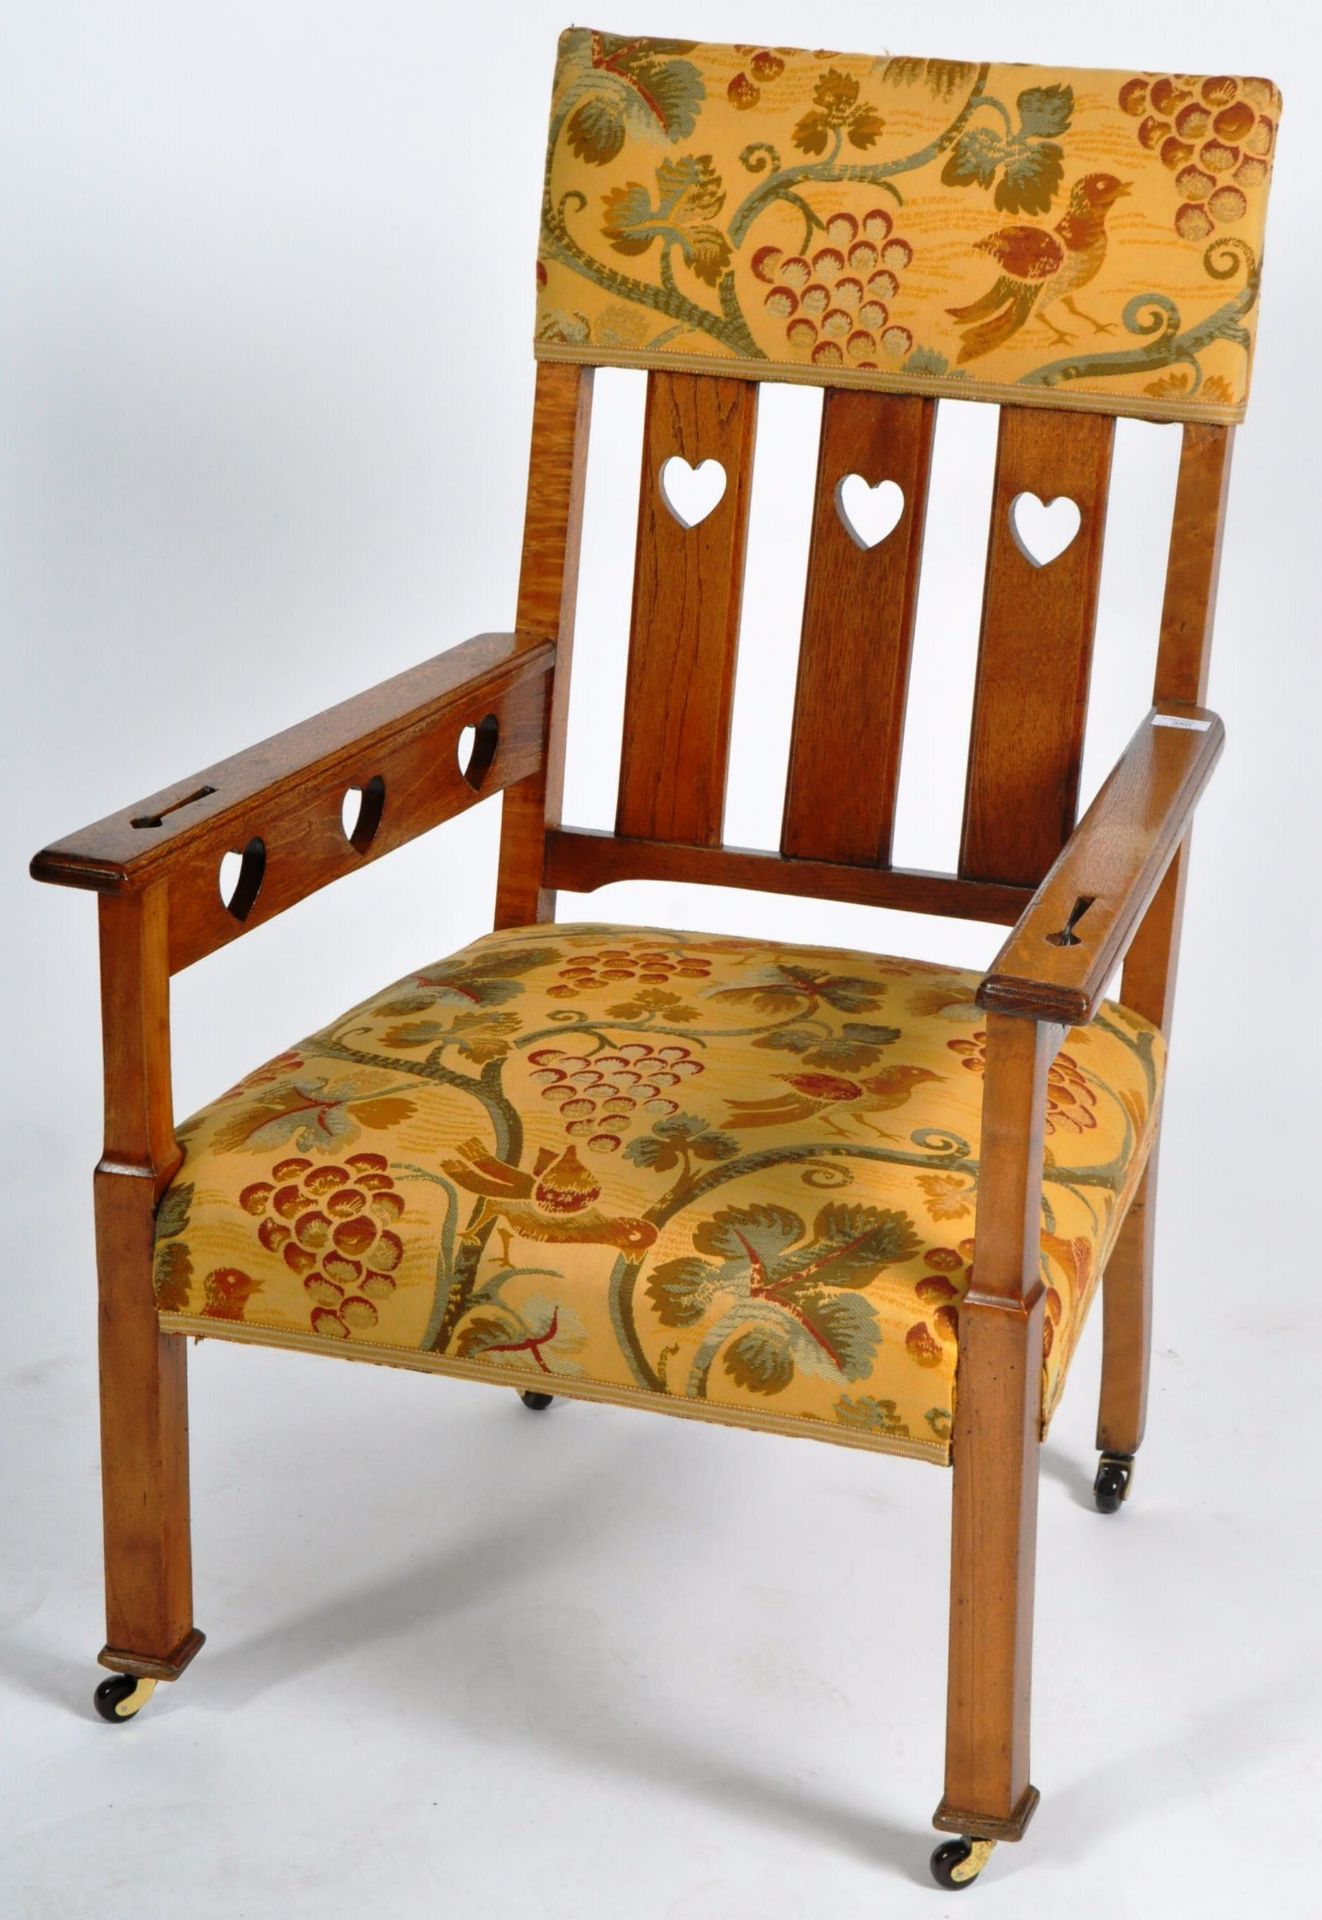 20TH CENTURY ARTS & CRAFTS ARMCHAIR IN THE MANNER OF CFA VOYSEY - Image 9 of 9